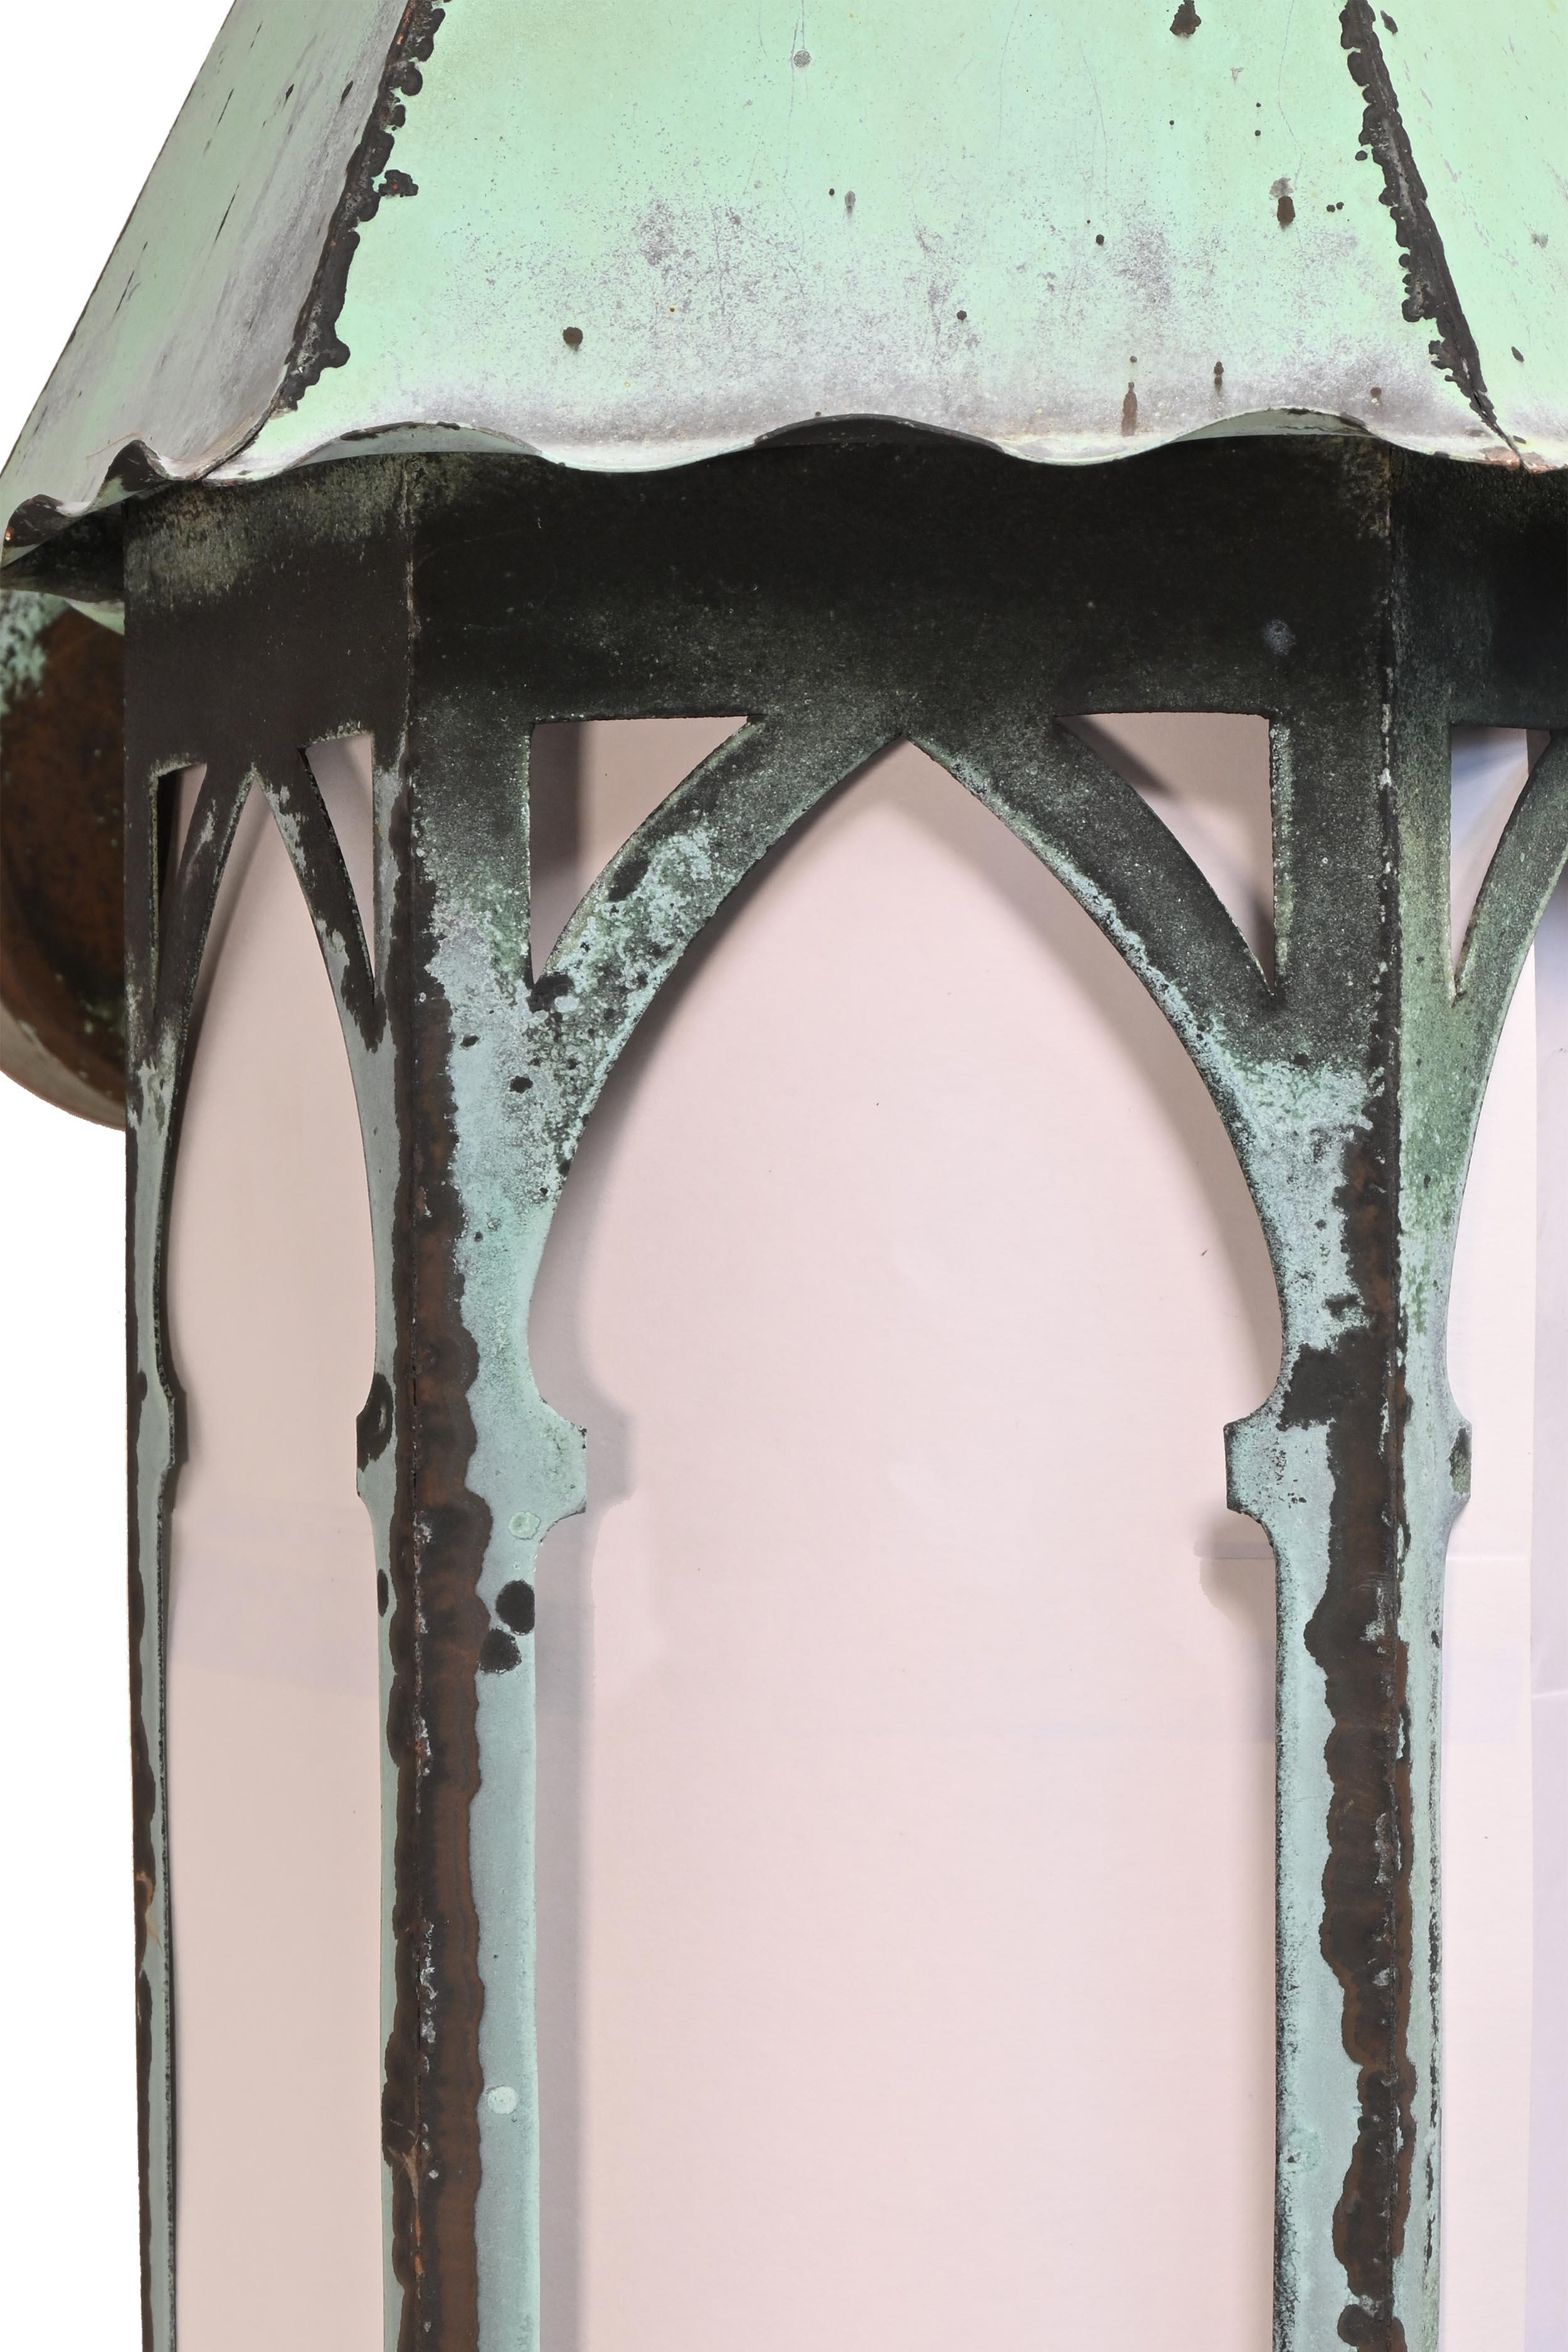 Tall Gothic Steeple Top Entrance Sconces Copper Verdigris Patina In Good Condition For Sale In Minneapolis, MN